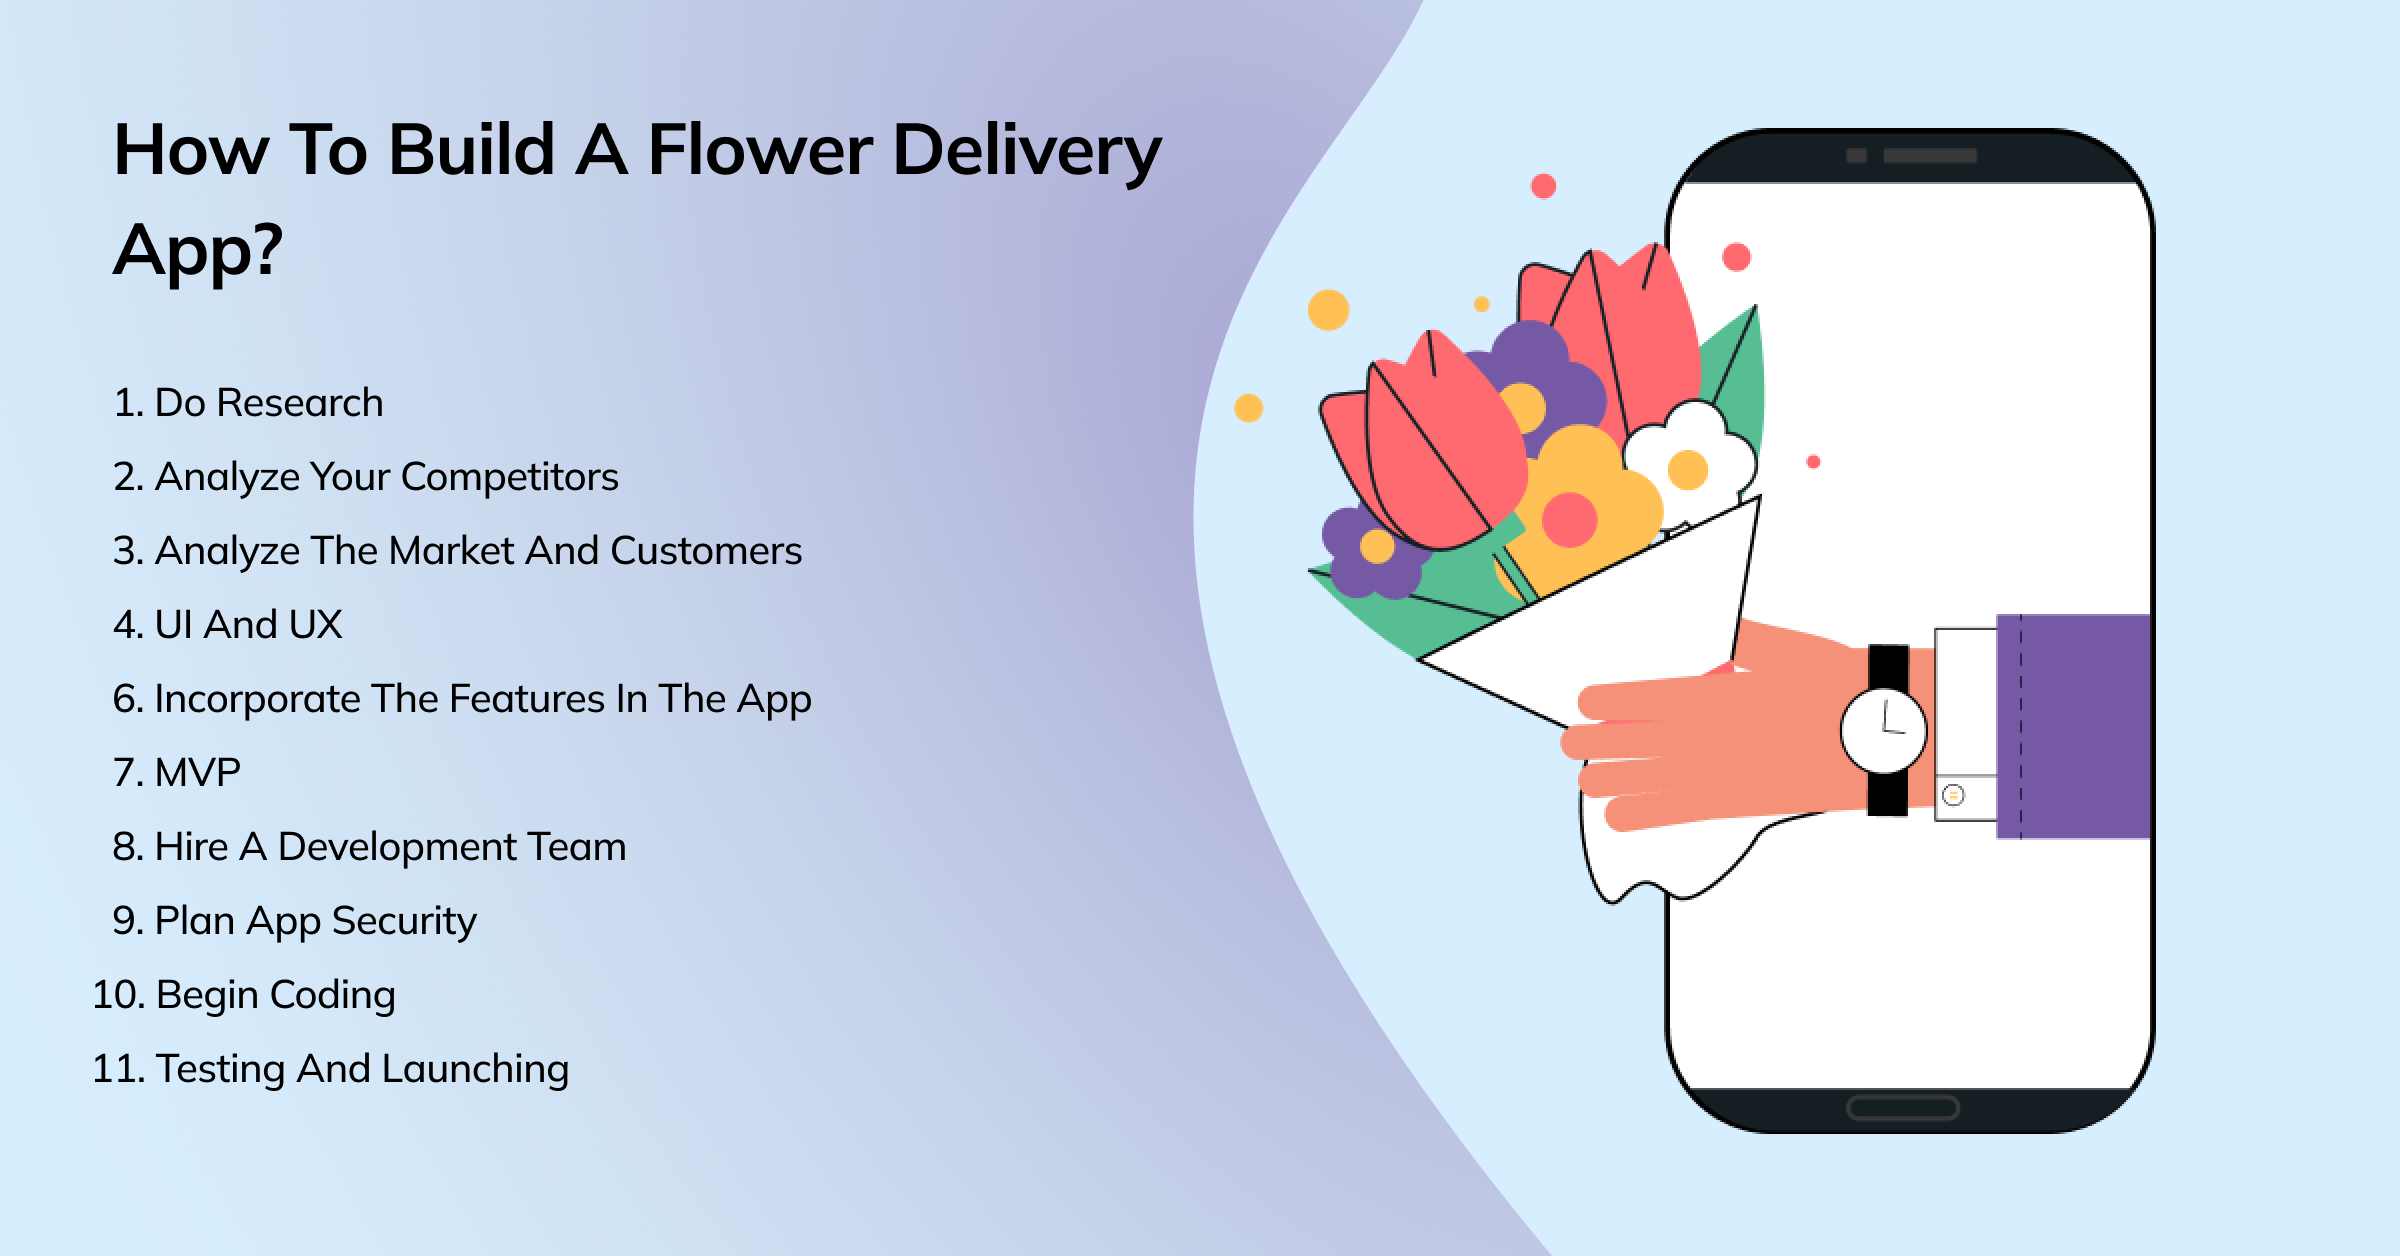 How to Build a Flower Delivery App